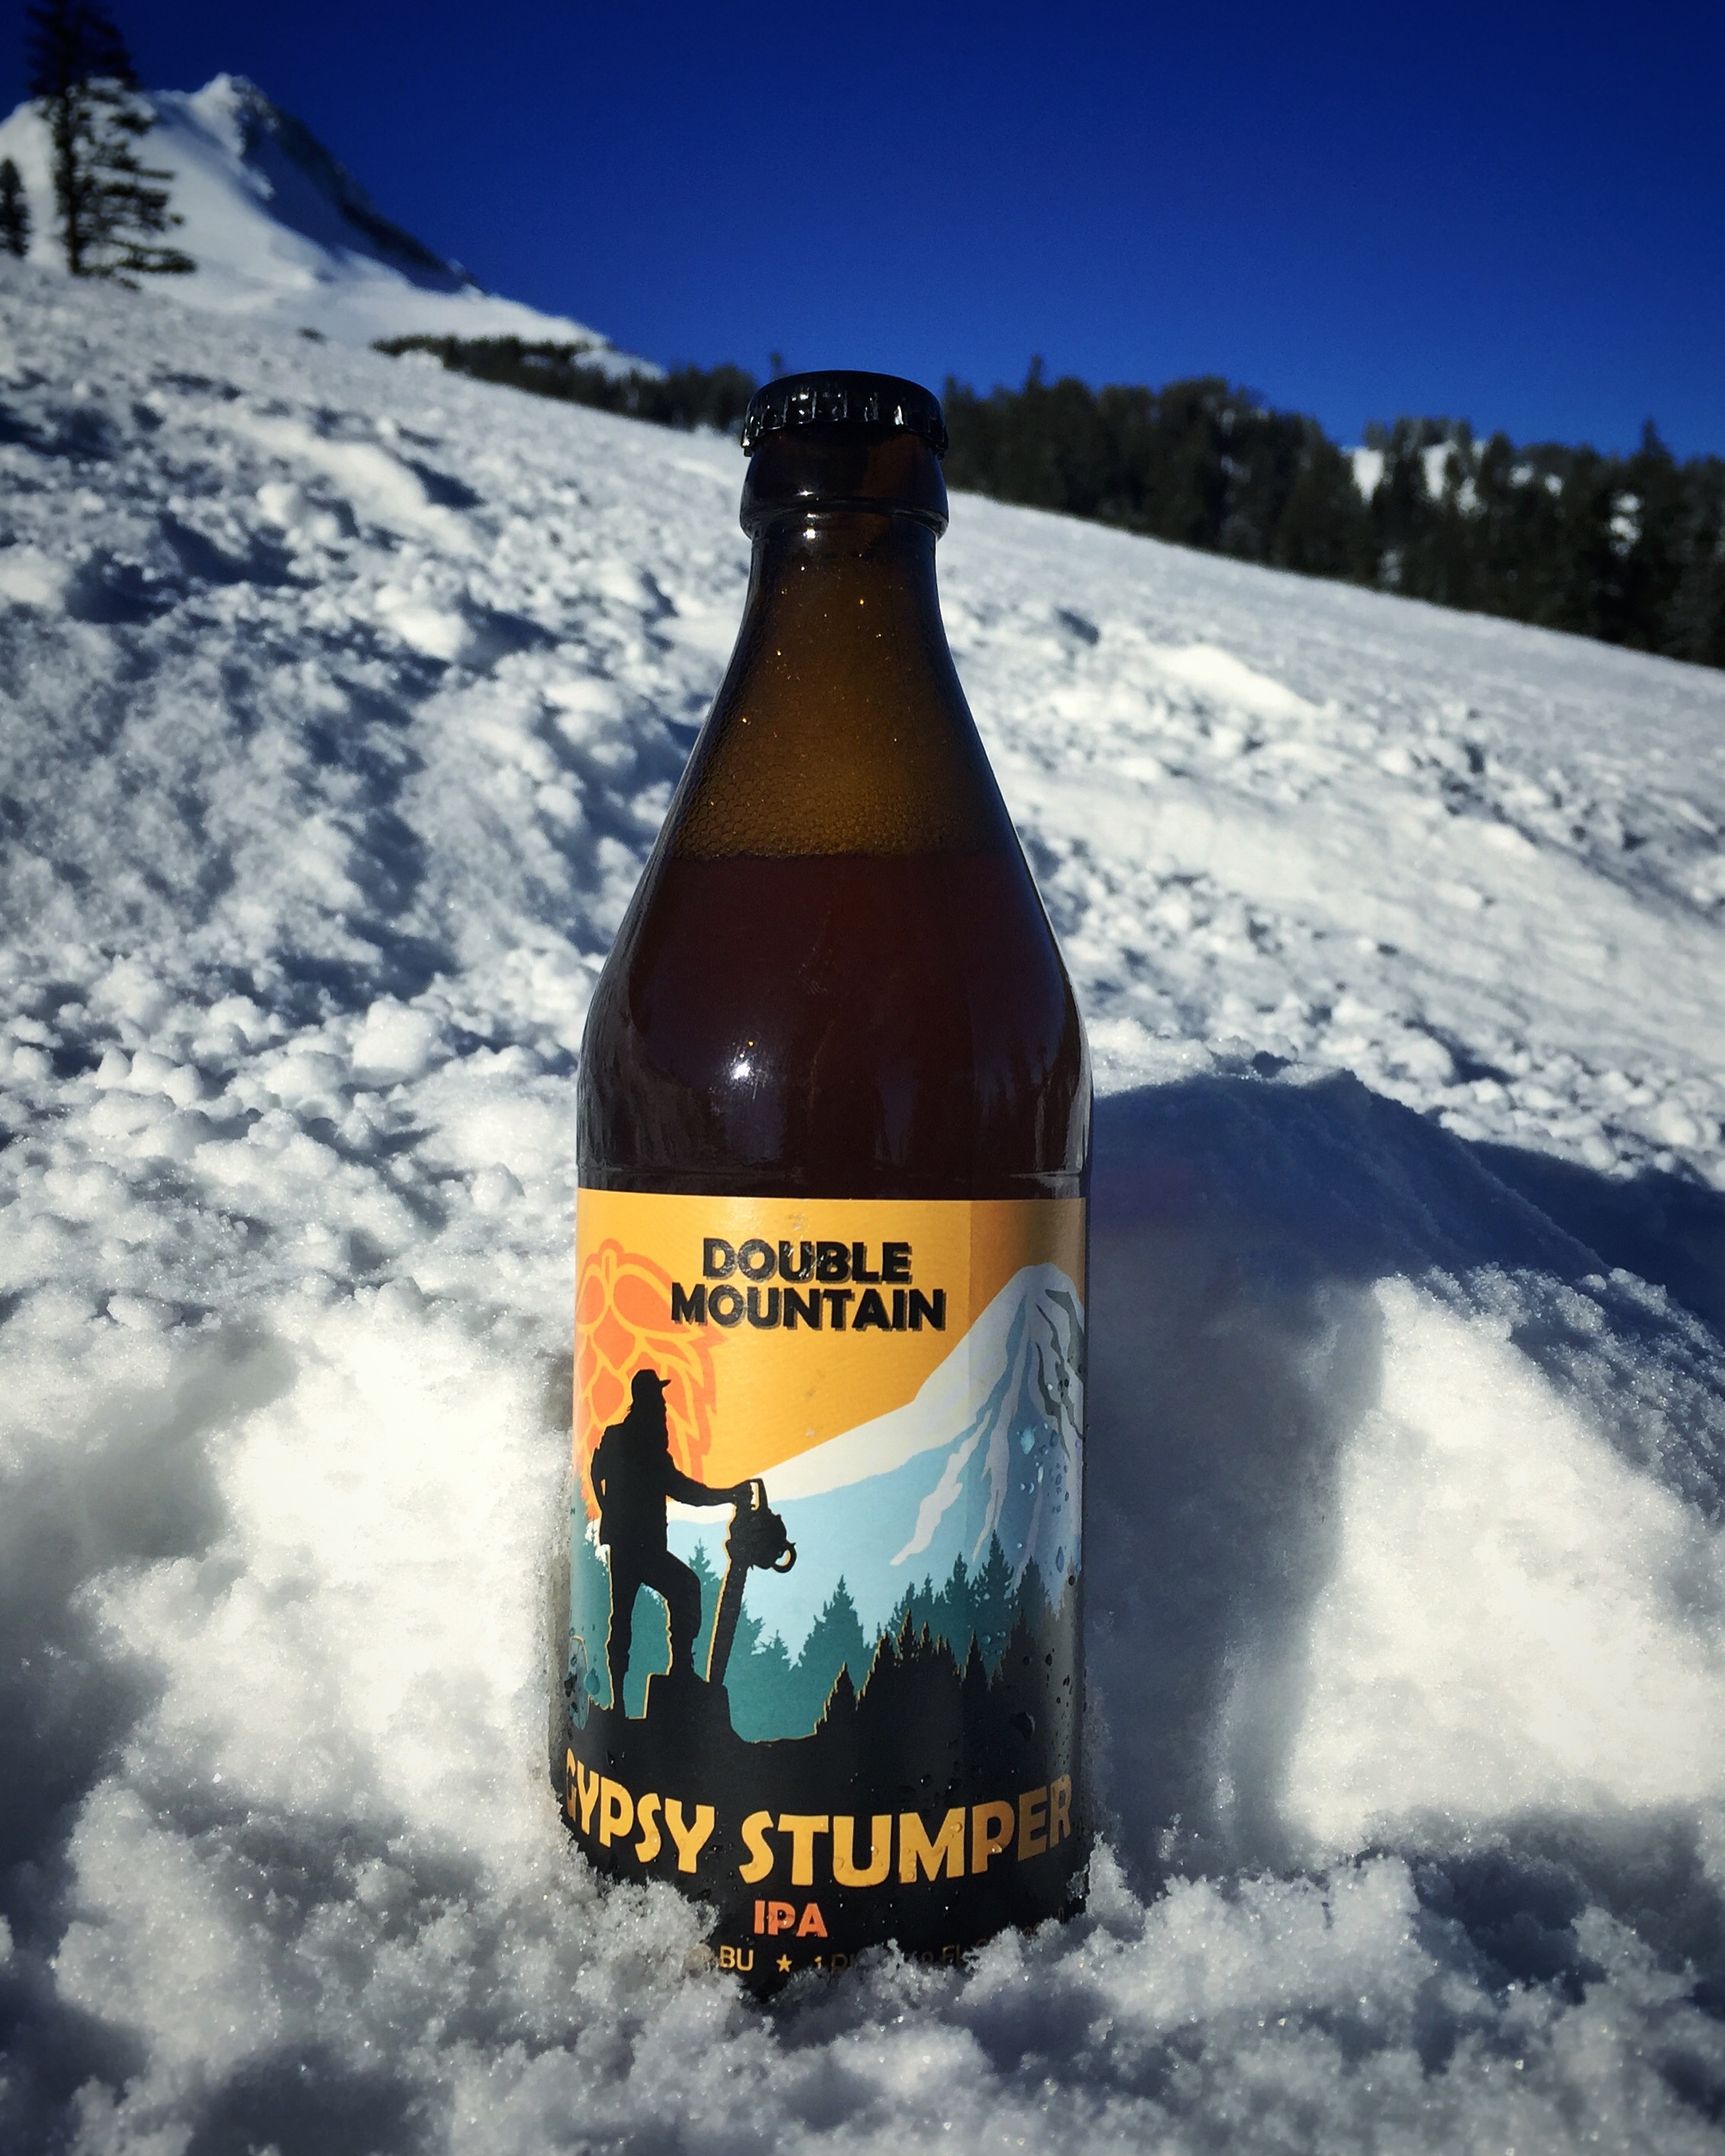 Gypsy Stumper IPA on Mt. Hood (image courtesy of Double Mountain Brewery)